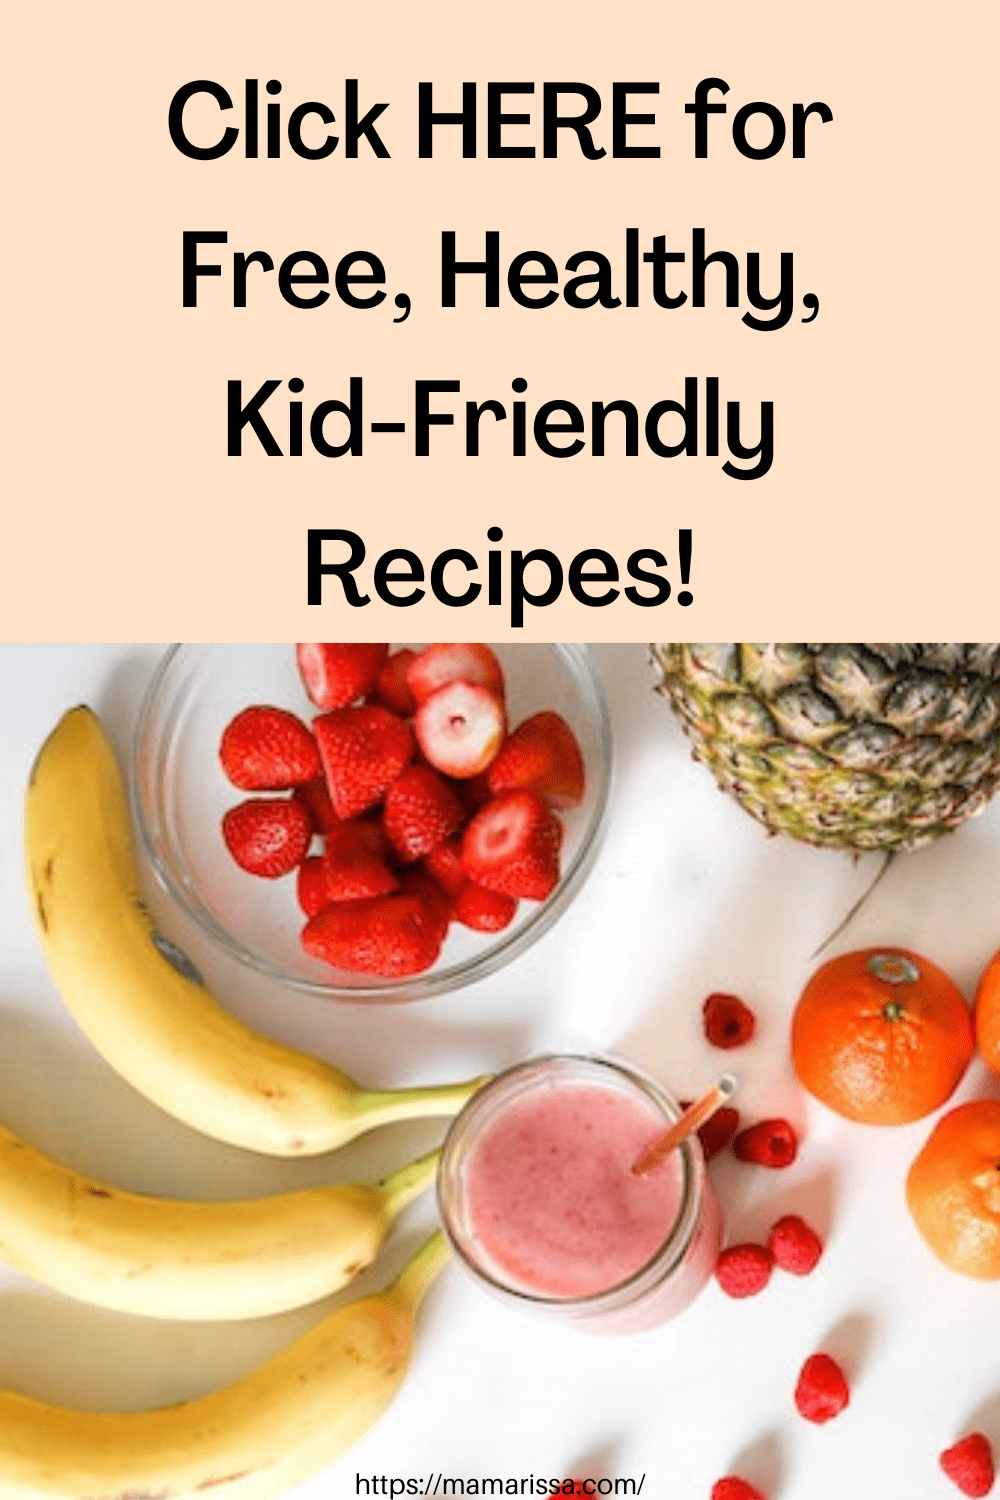 Click HERE for Free, Healthy, Kid-Friendly Recipes!